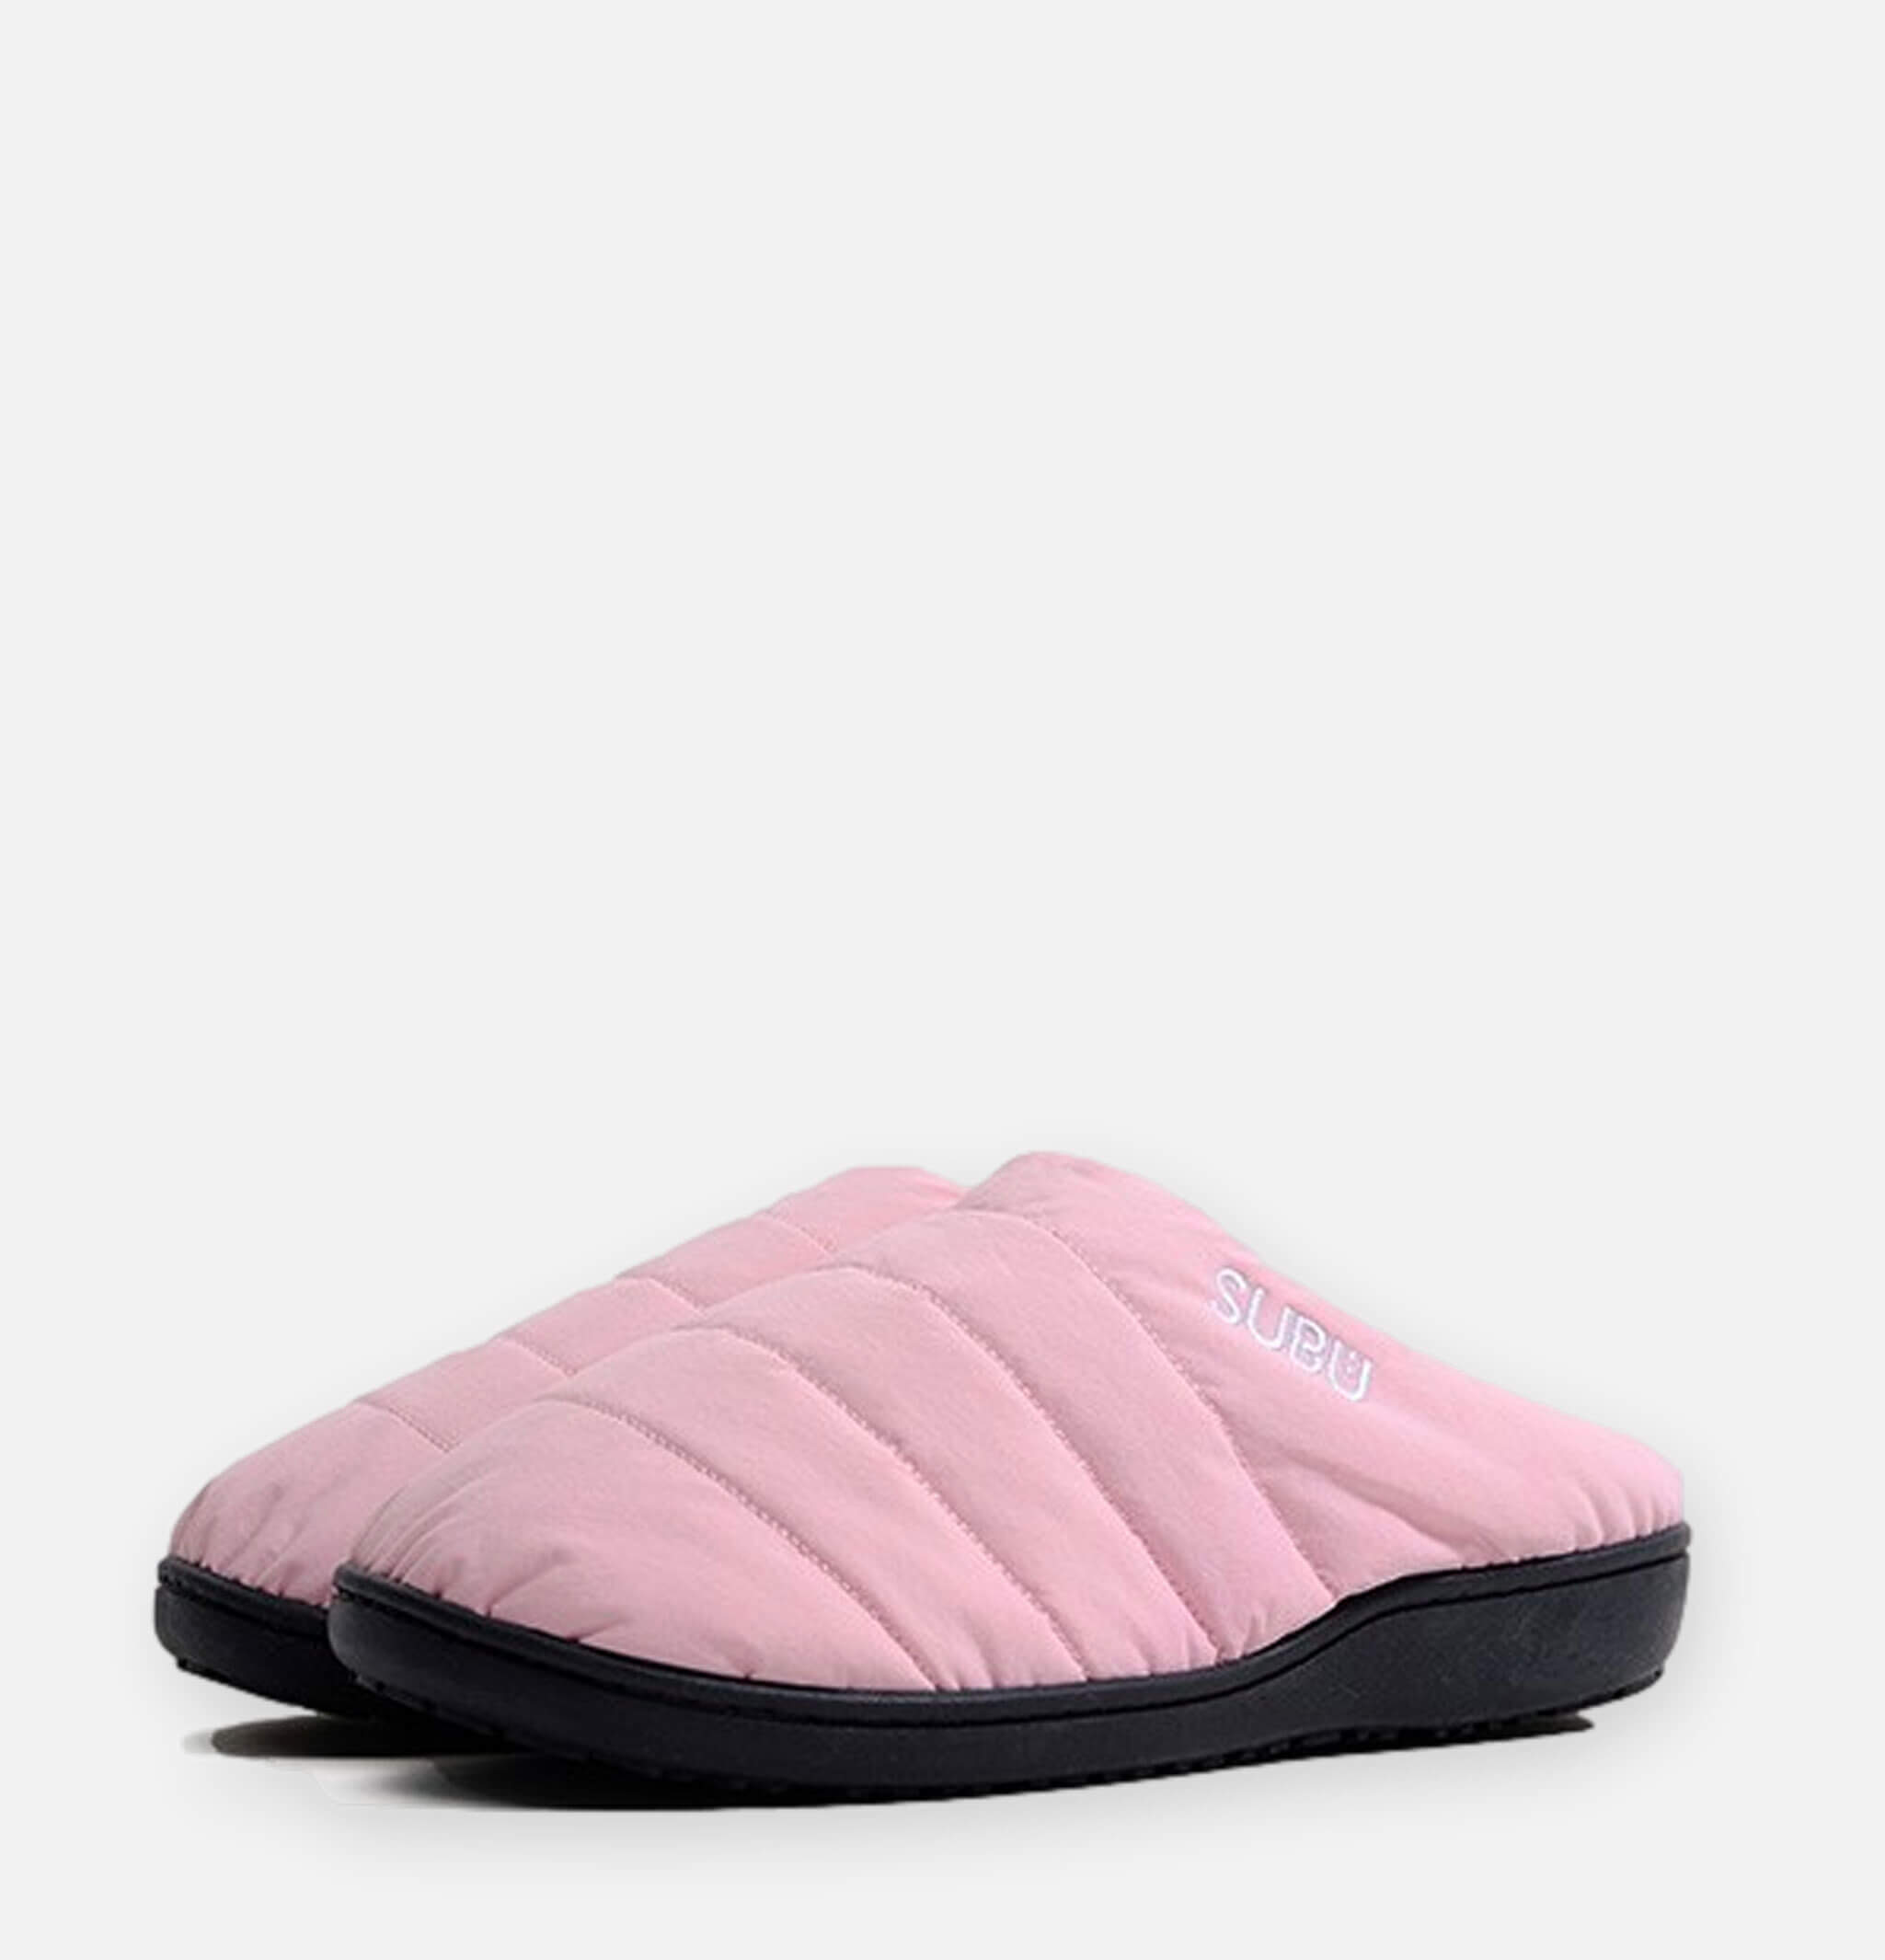 Chausson Uneven Pink